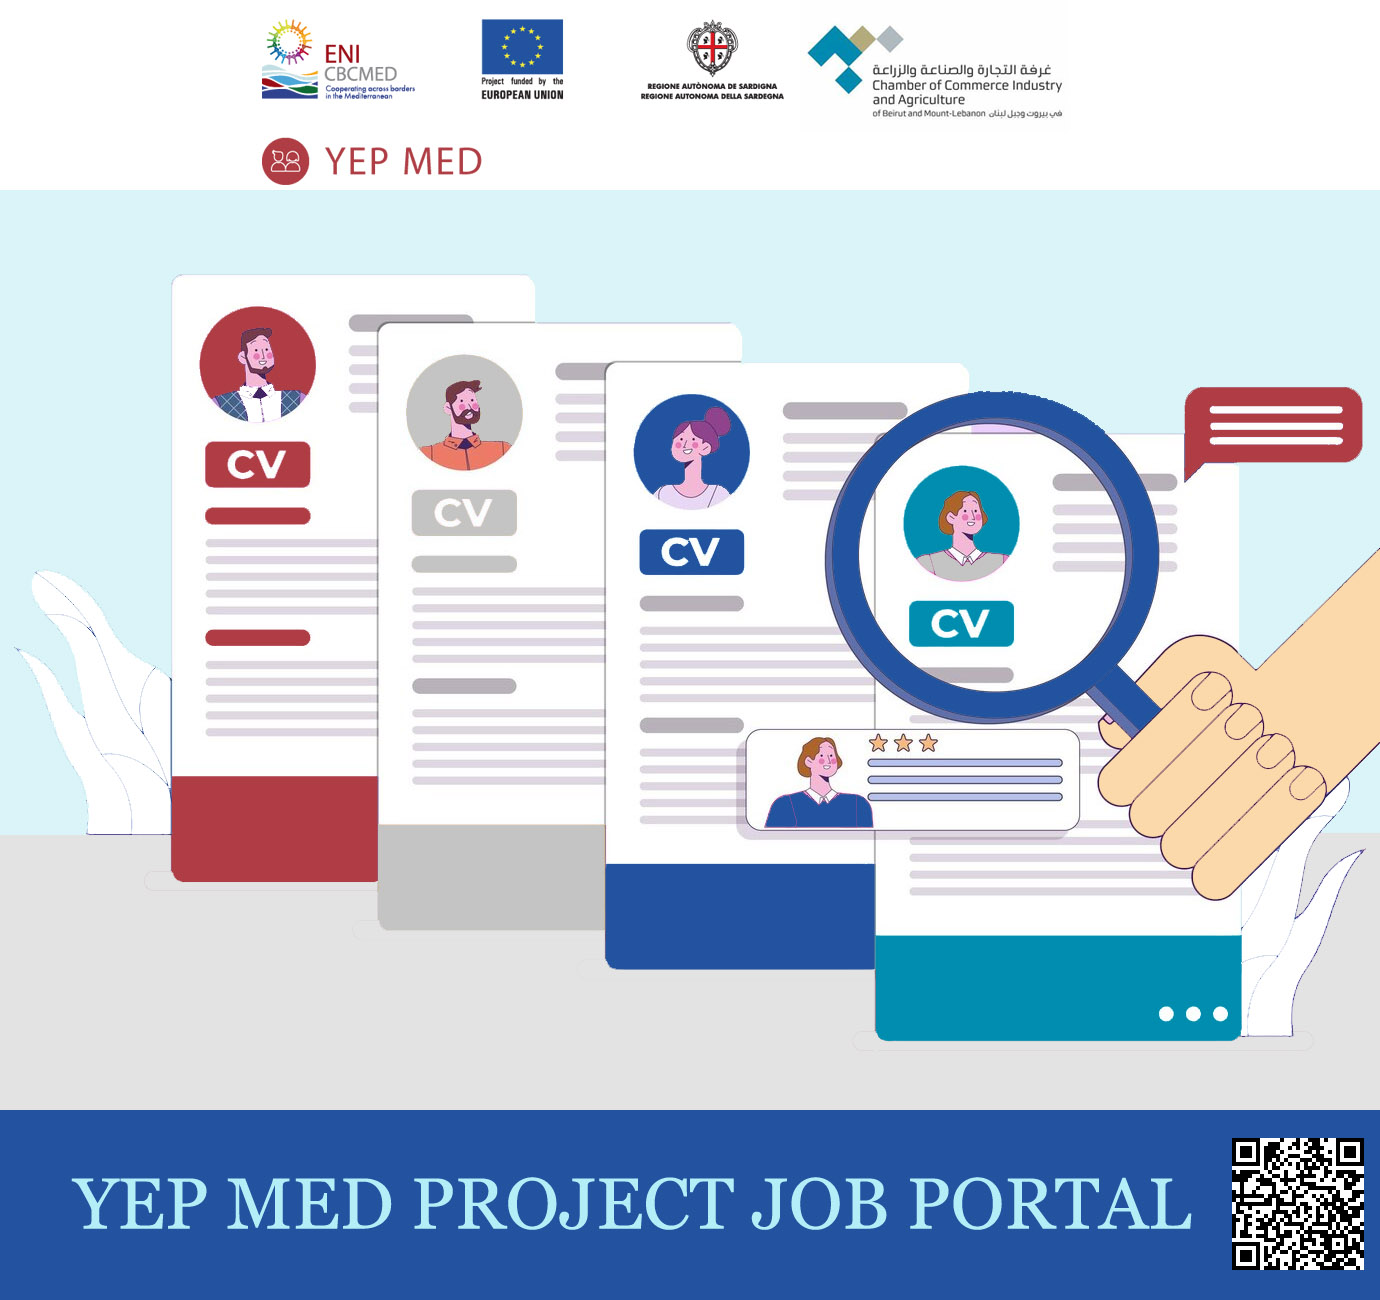 Find Your port and logistics Job with the YEP MED Portal!